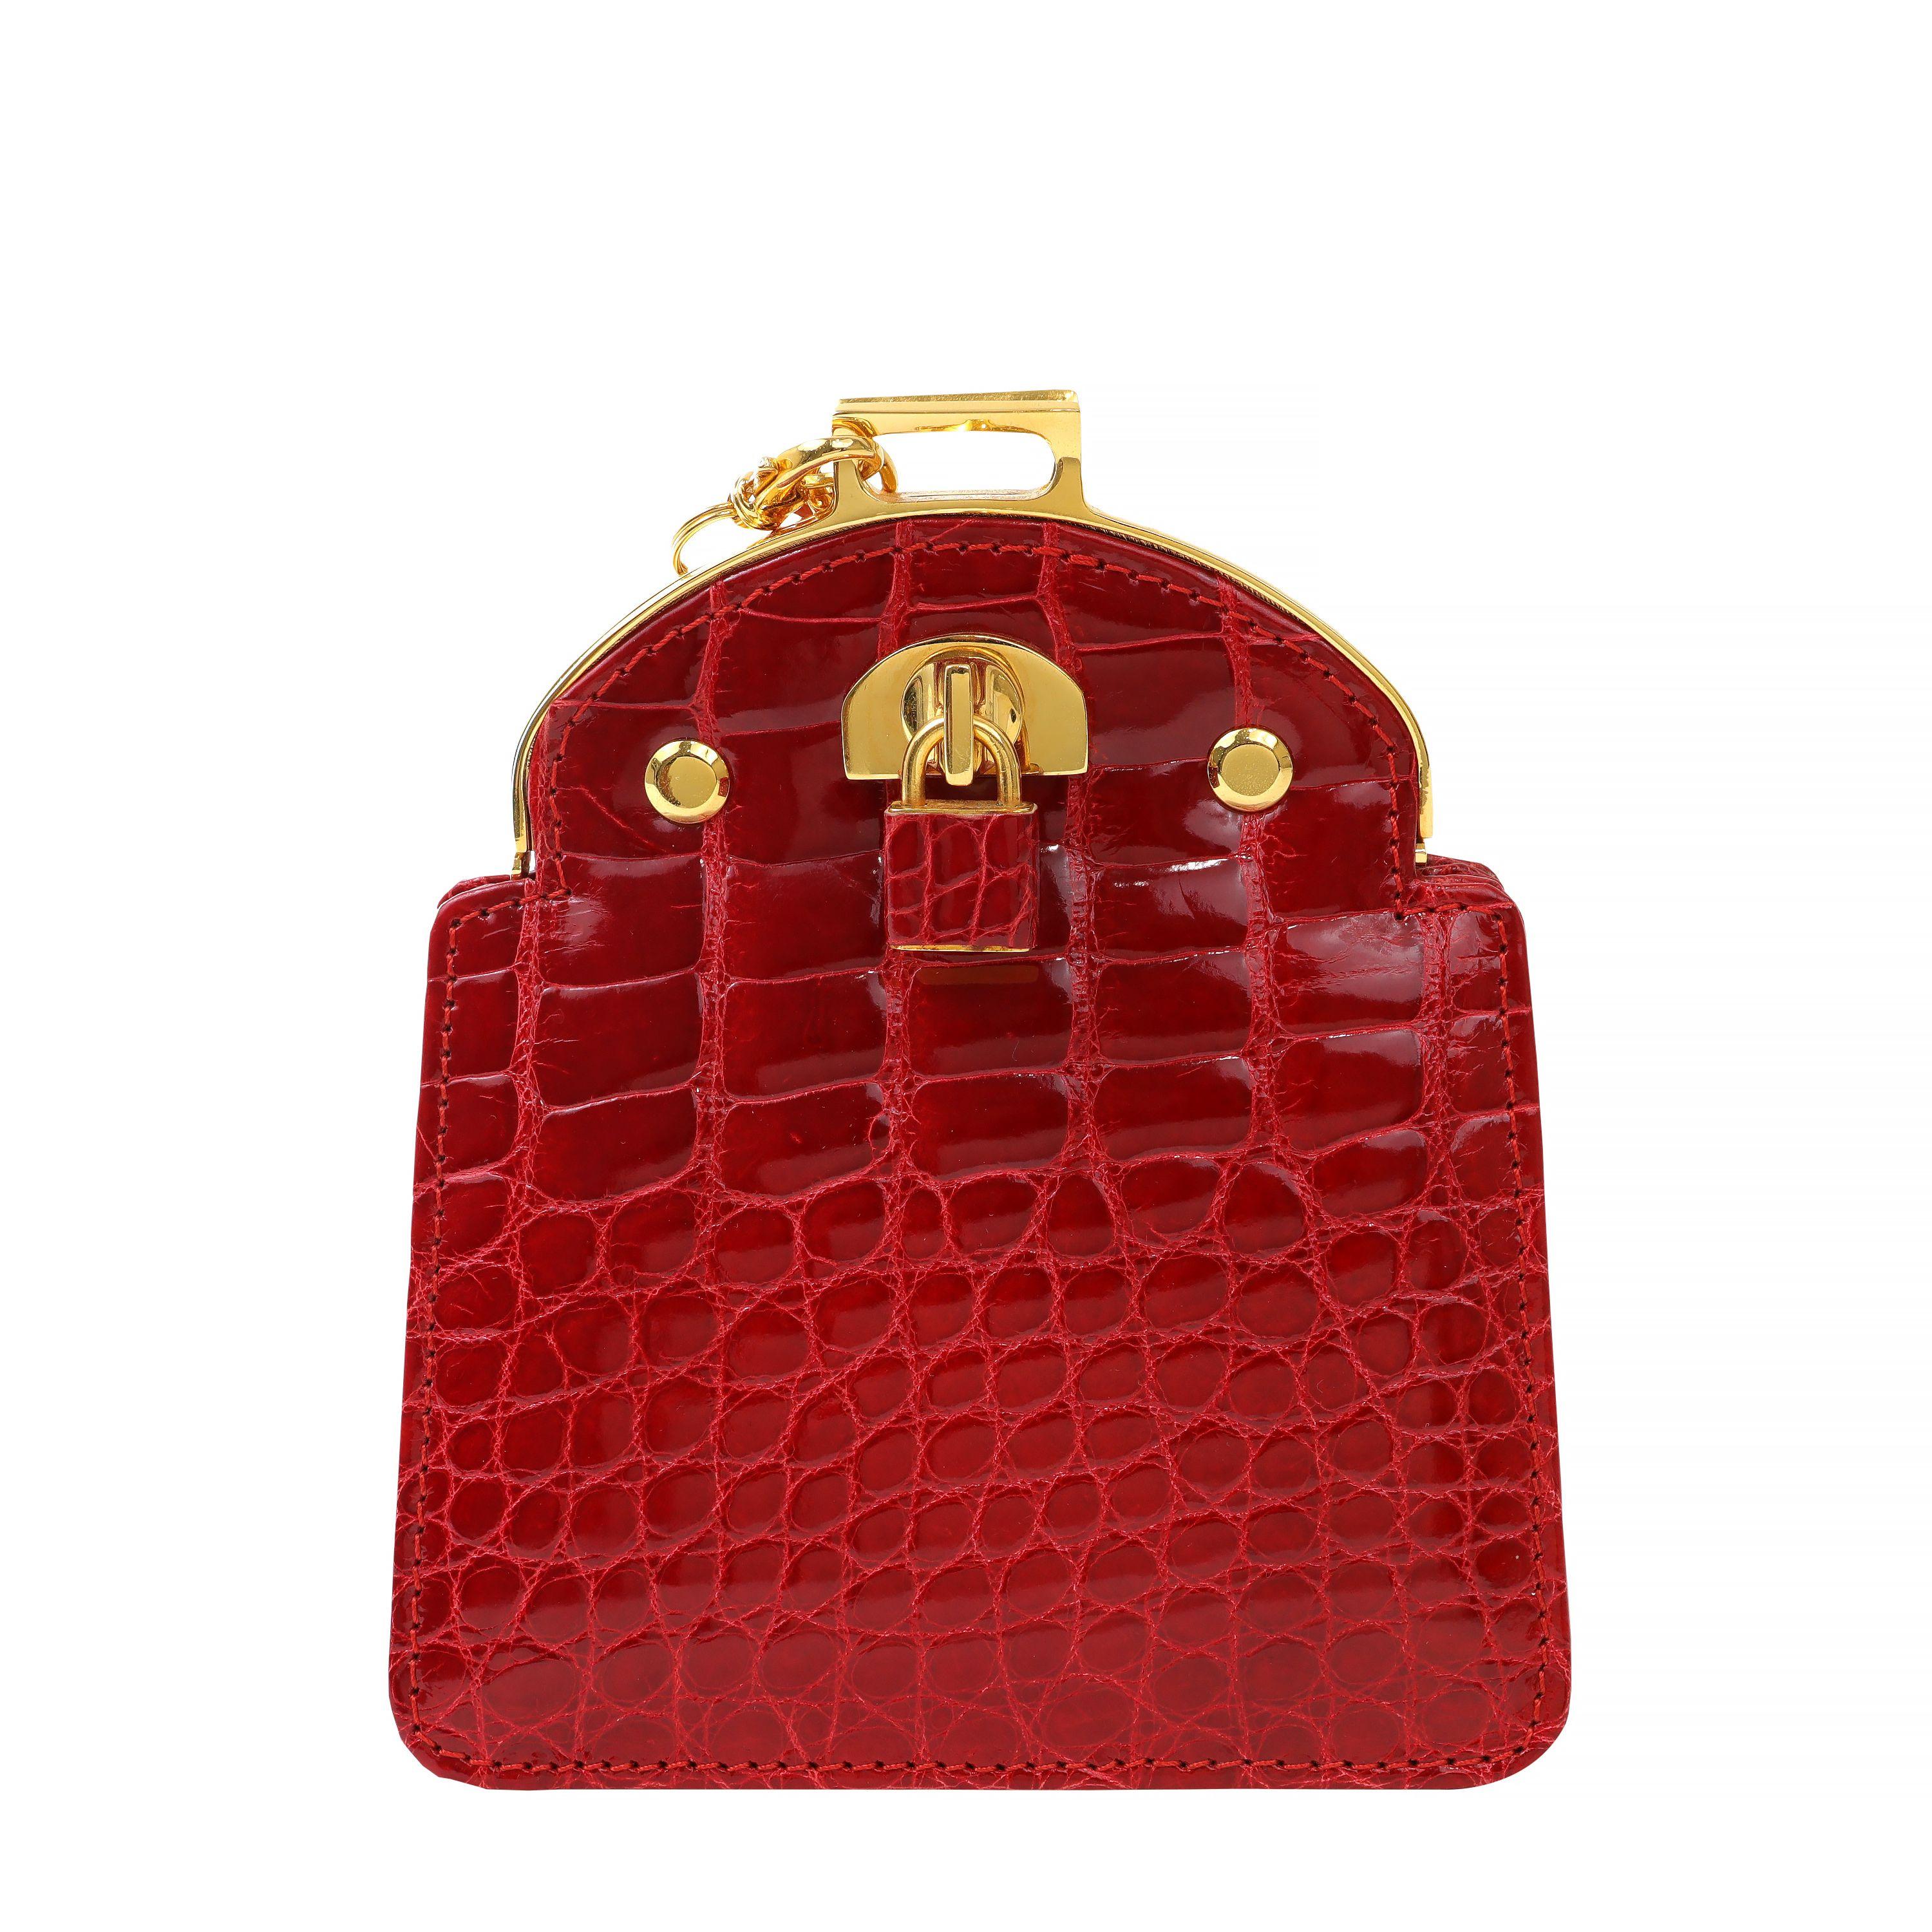  Giorgio’s Vintage Red Crocodile Mini Evening Bag with Gold Hardware In Good Condition For Sale In Palm Beach, FL